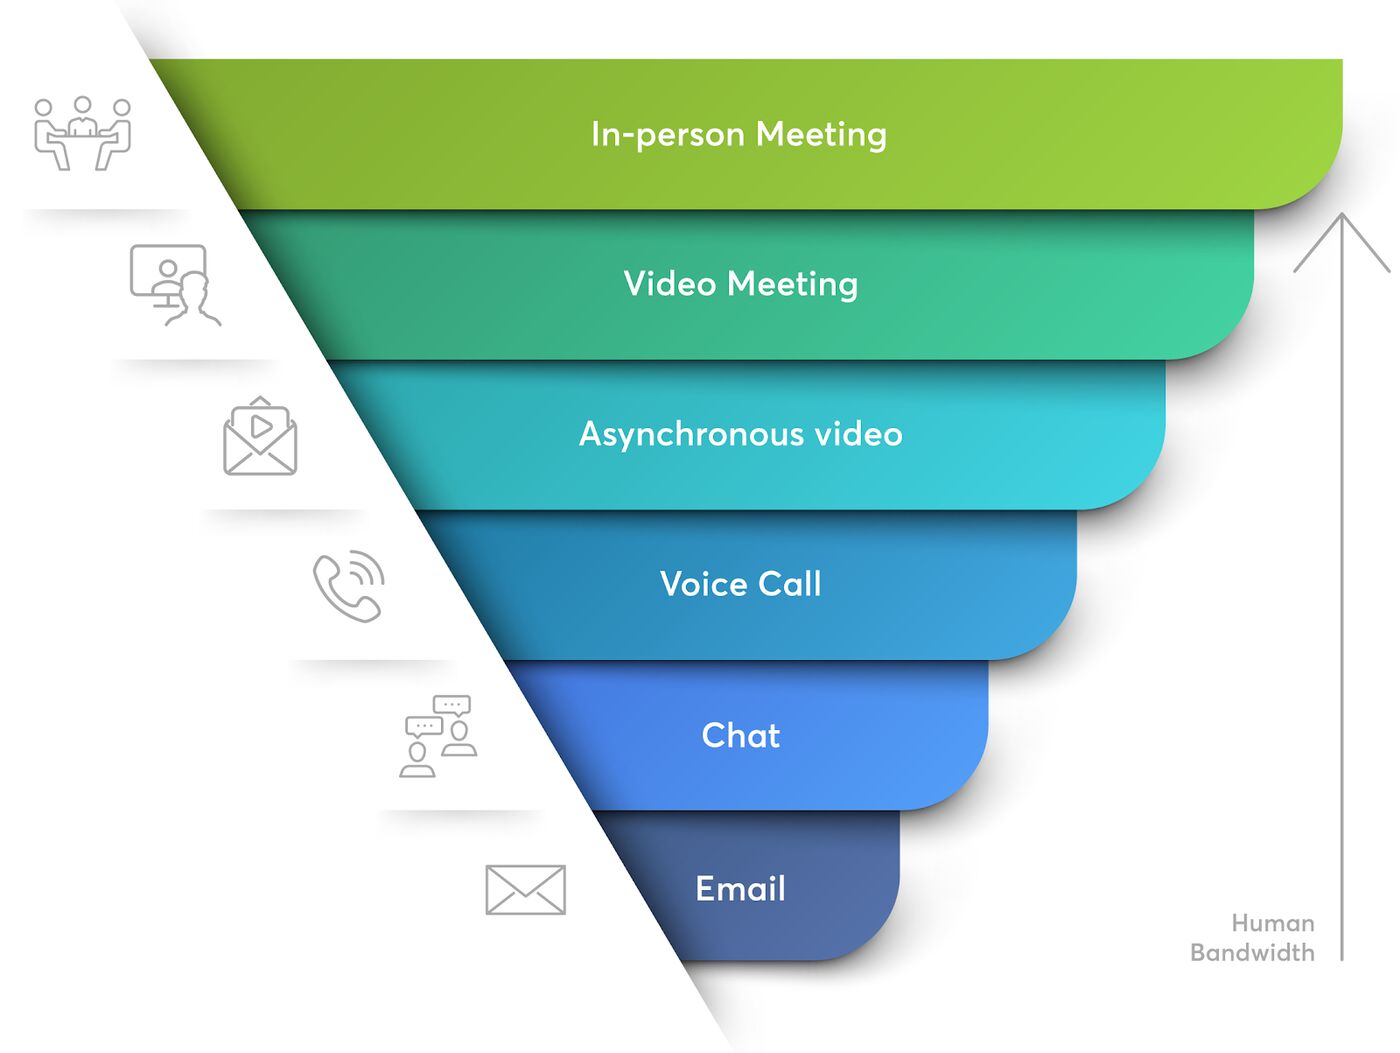 This chart shows the progression of communication bandwidth from high (in-person meetings) to low (email)